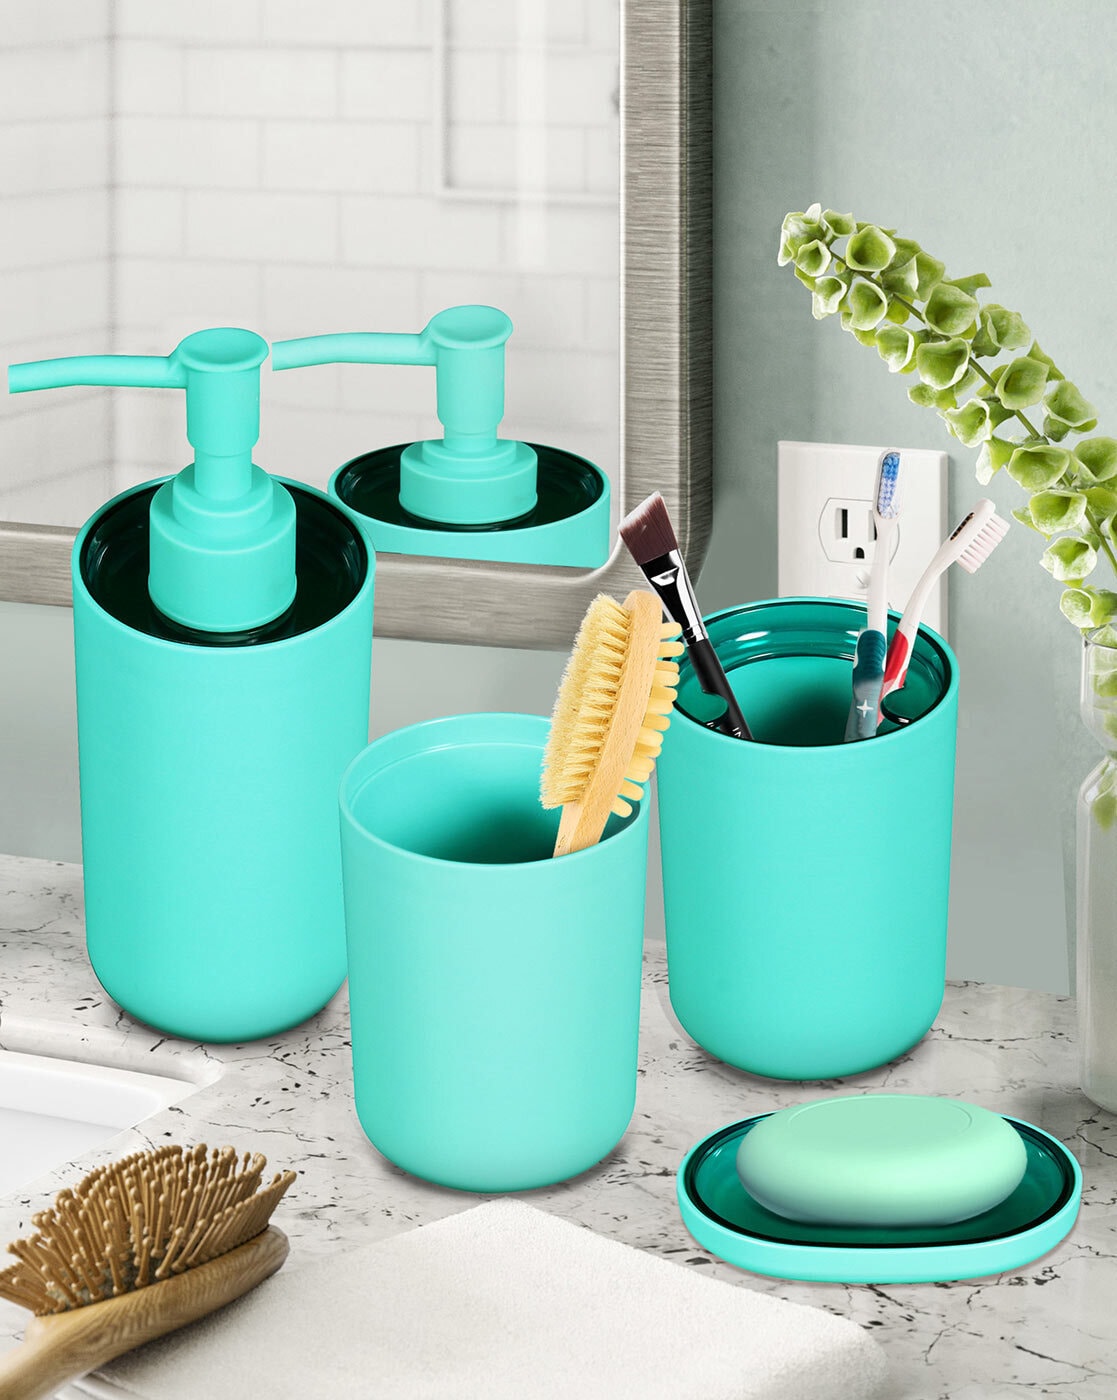 Buy Light Turquoise Bathroom Accessories For Home Kitchen By Storyhome Online Ajiocom